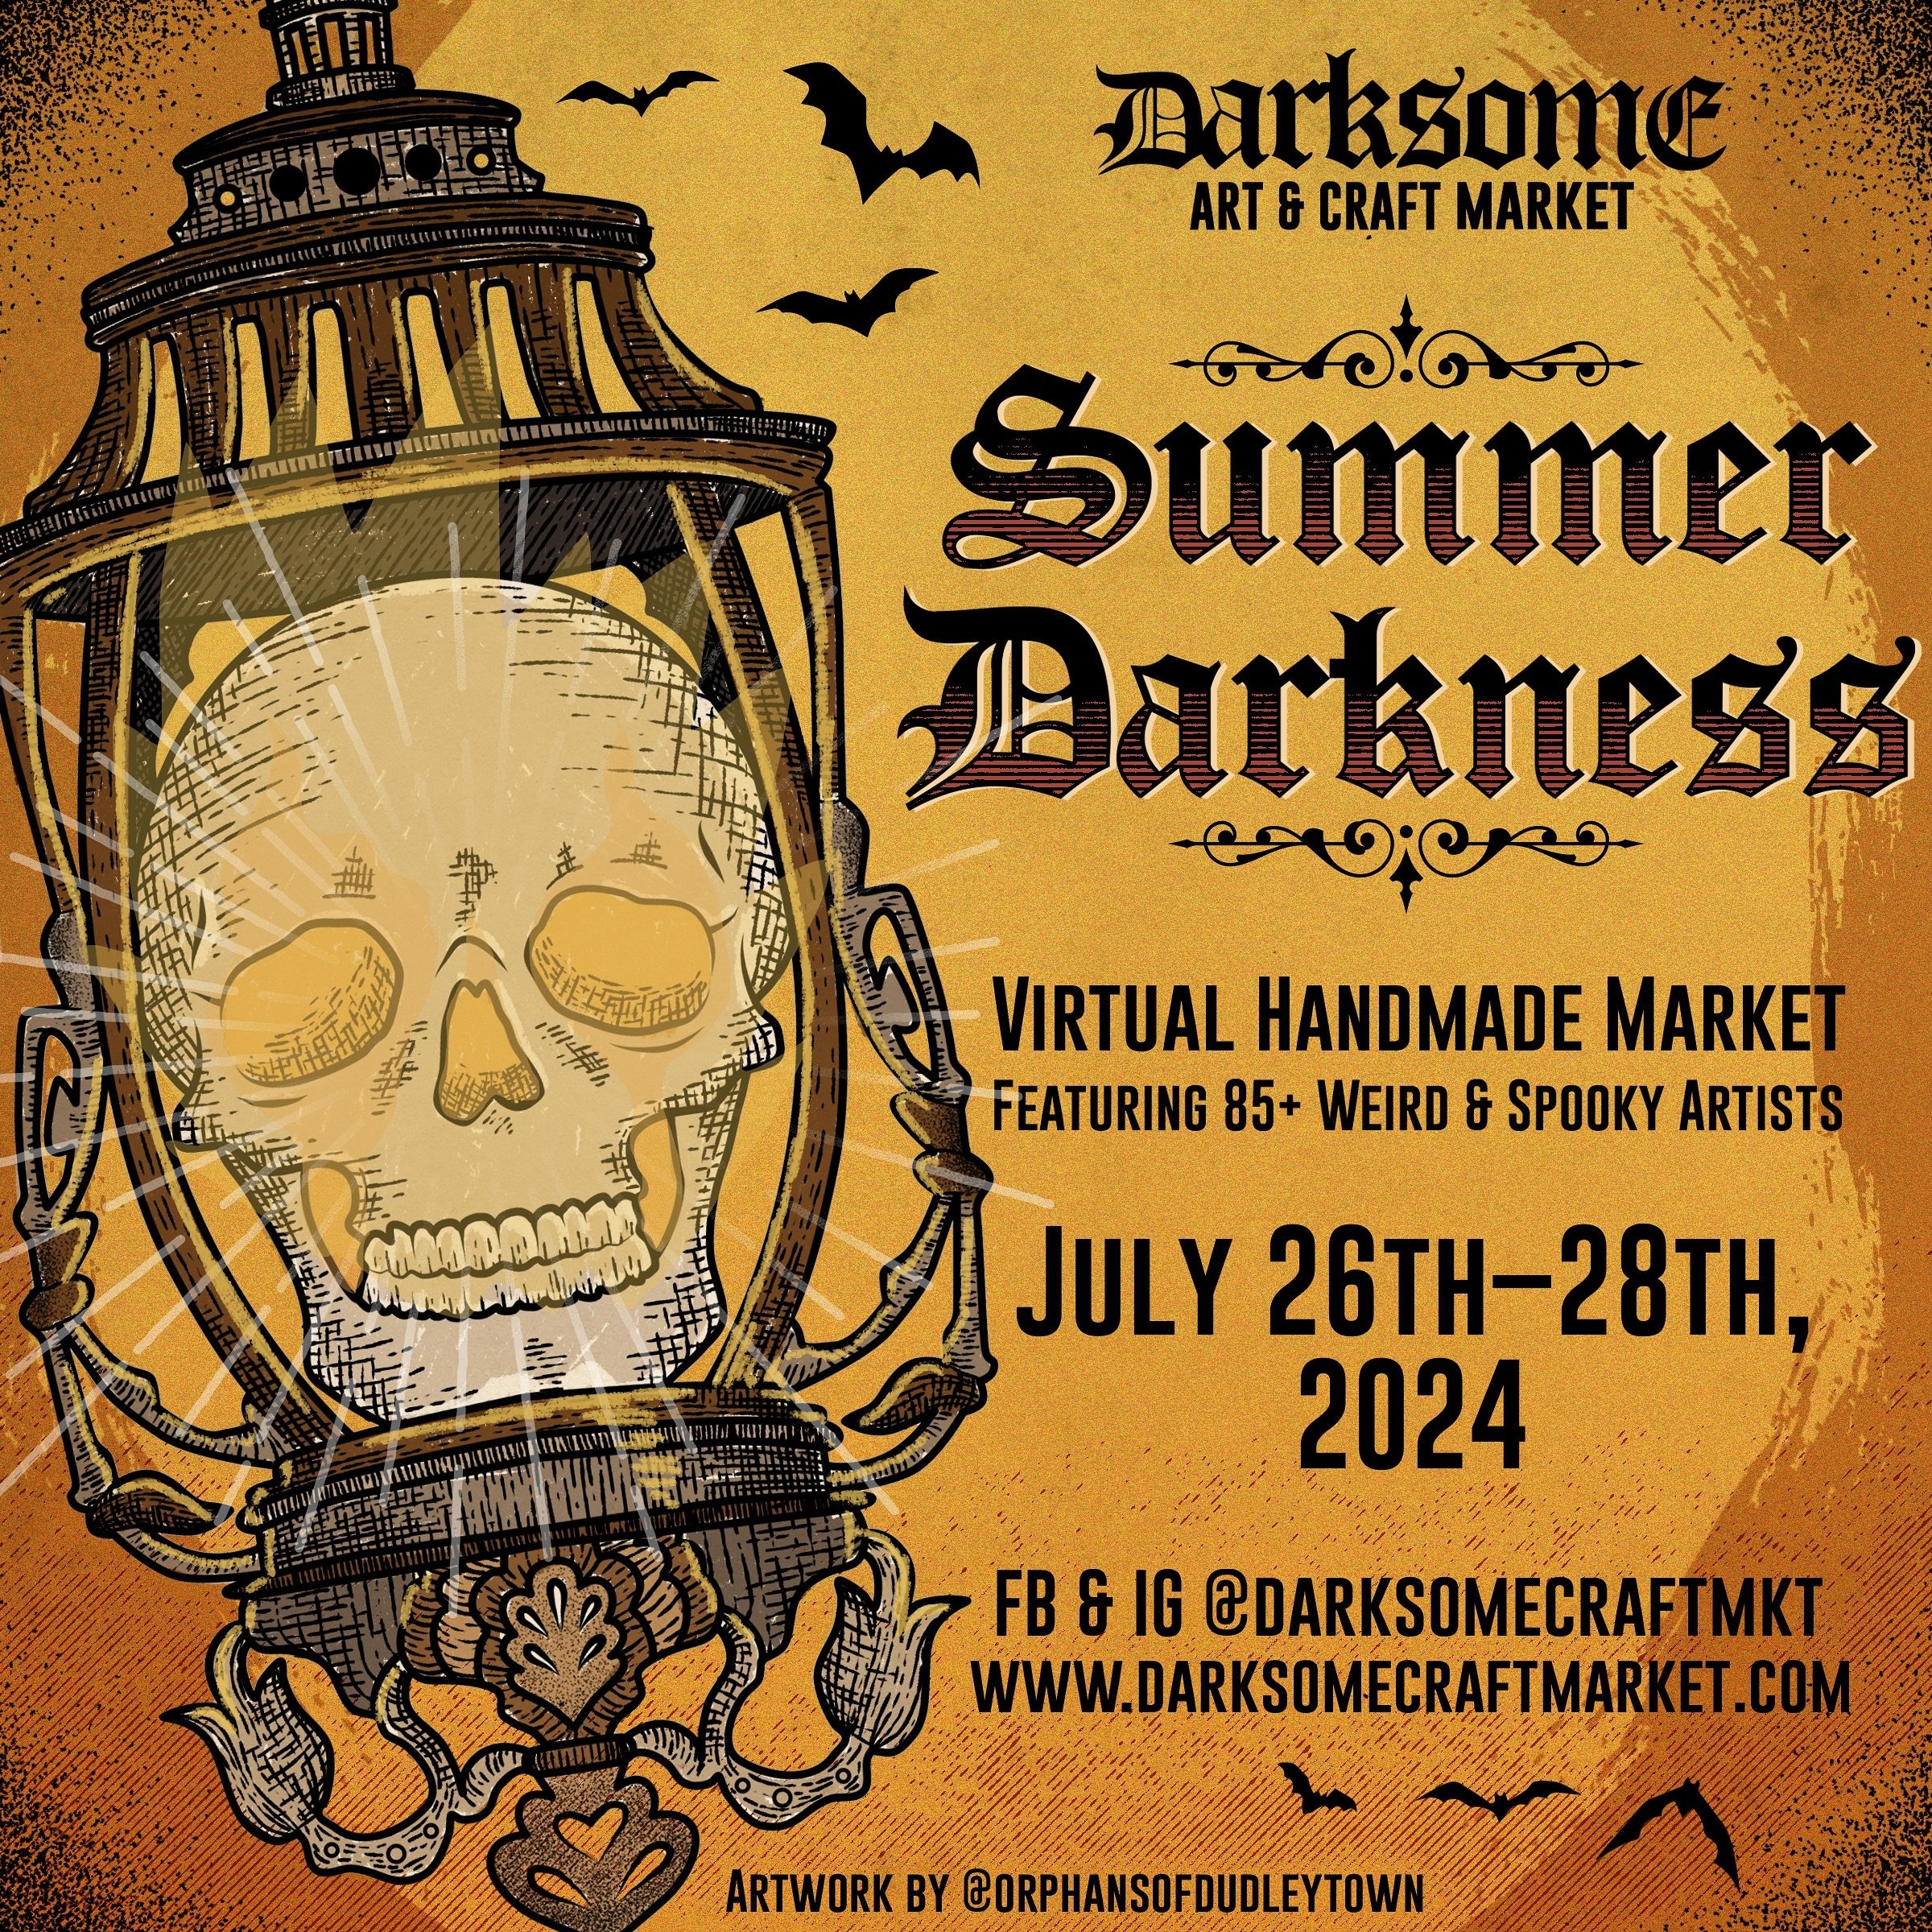 💥 Check out the awesome flyer by @orphansofdudleytown for our next virtual market! Like to vend with us? Applications are open! Link in bio 🔗 Deadline 5/28

🌘 𝔖𝔲𝔪𝔪𝔢𝔯 𝔇𝔞𝔯𝔨𝔫𝔢𝔰𝔰 🌒
Virtual Handmade Market
July 26th - 28th, 2024

#darkar